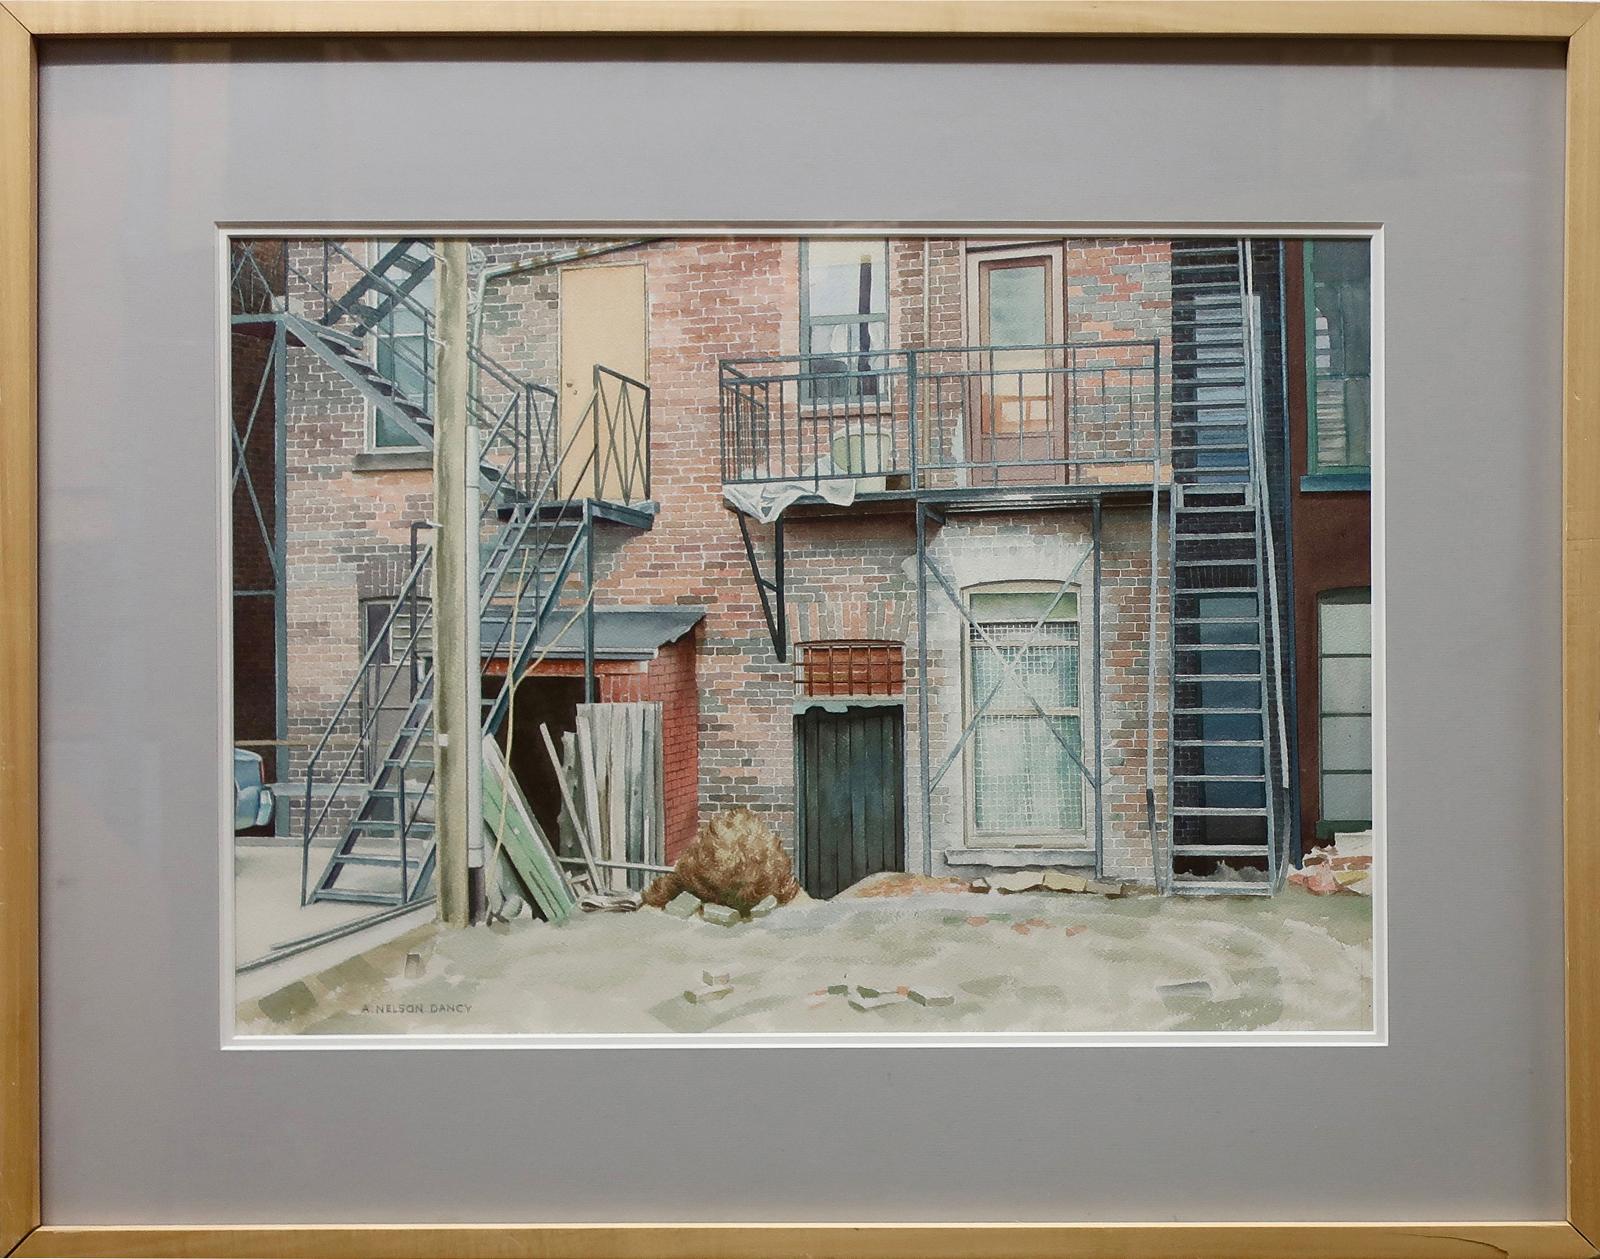 A. Nelson Dancy (1925) - Backlane In Cabbagetown